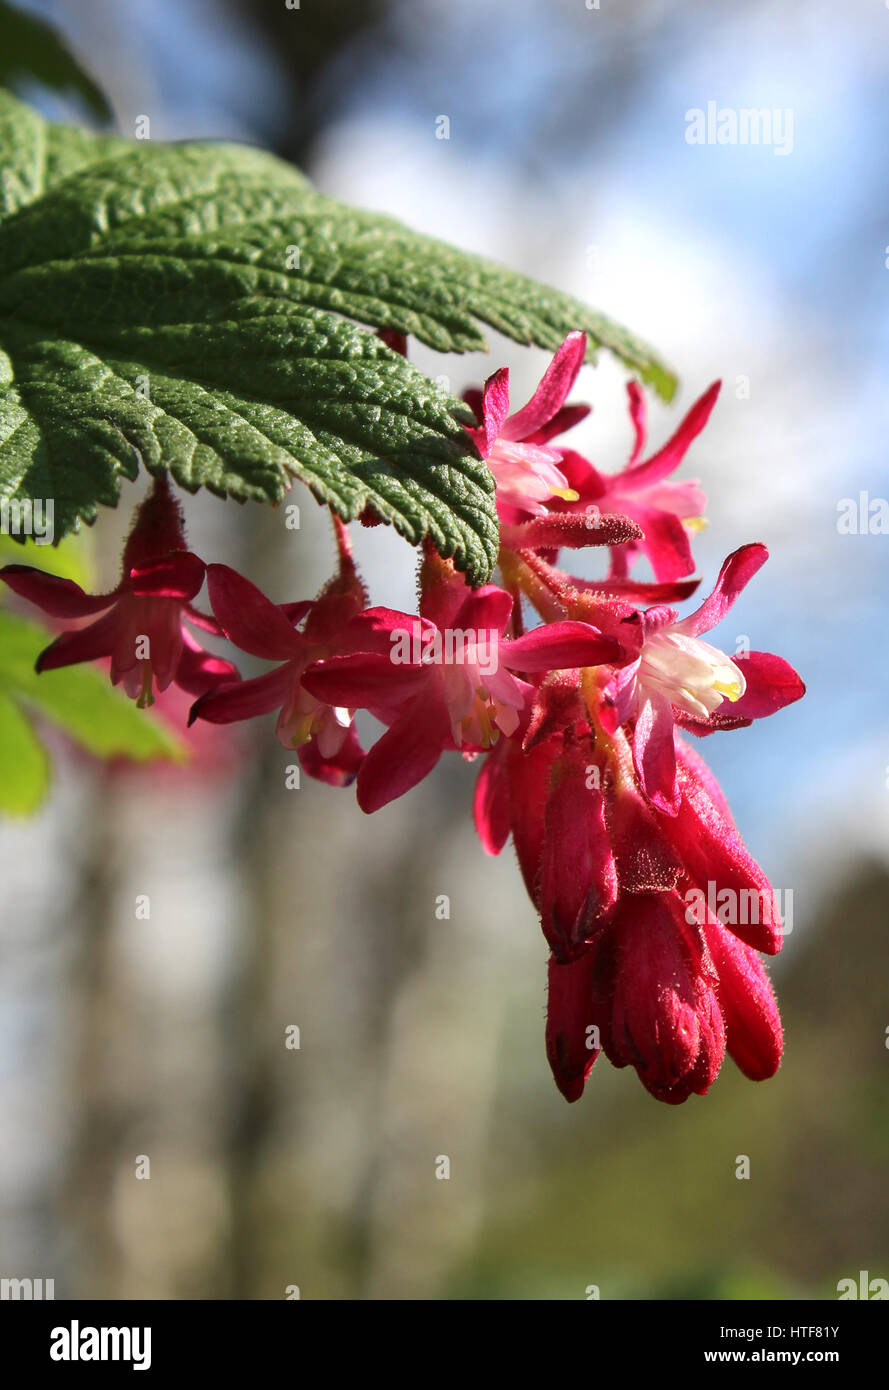 The early spring flower of Ribes sanguineum also known as Flowering Currant or Red Flower Currant. Stock Photo